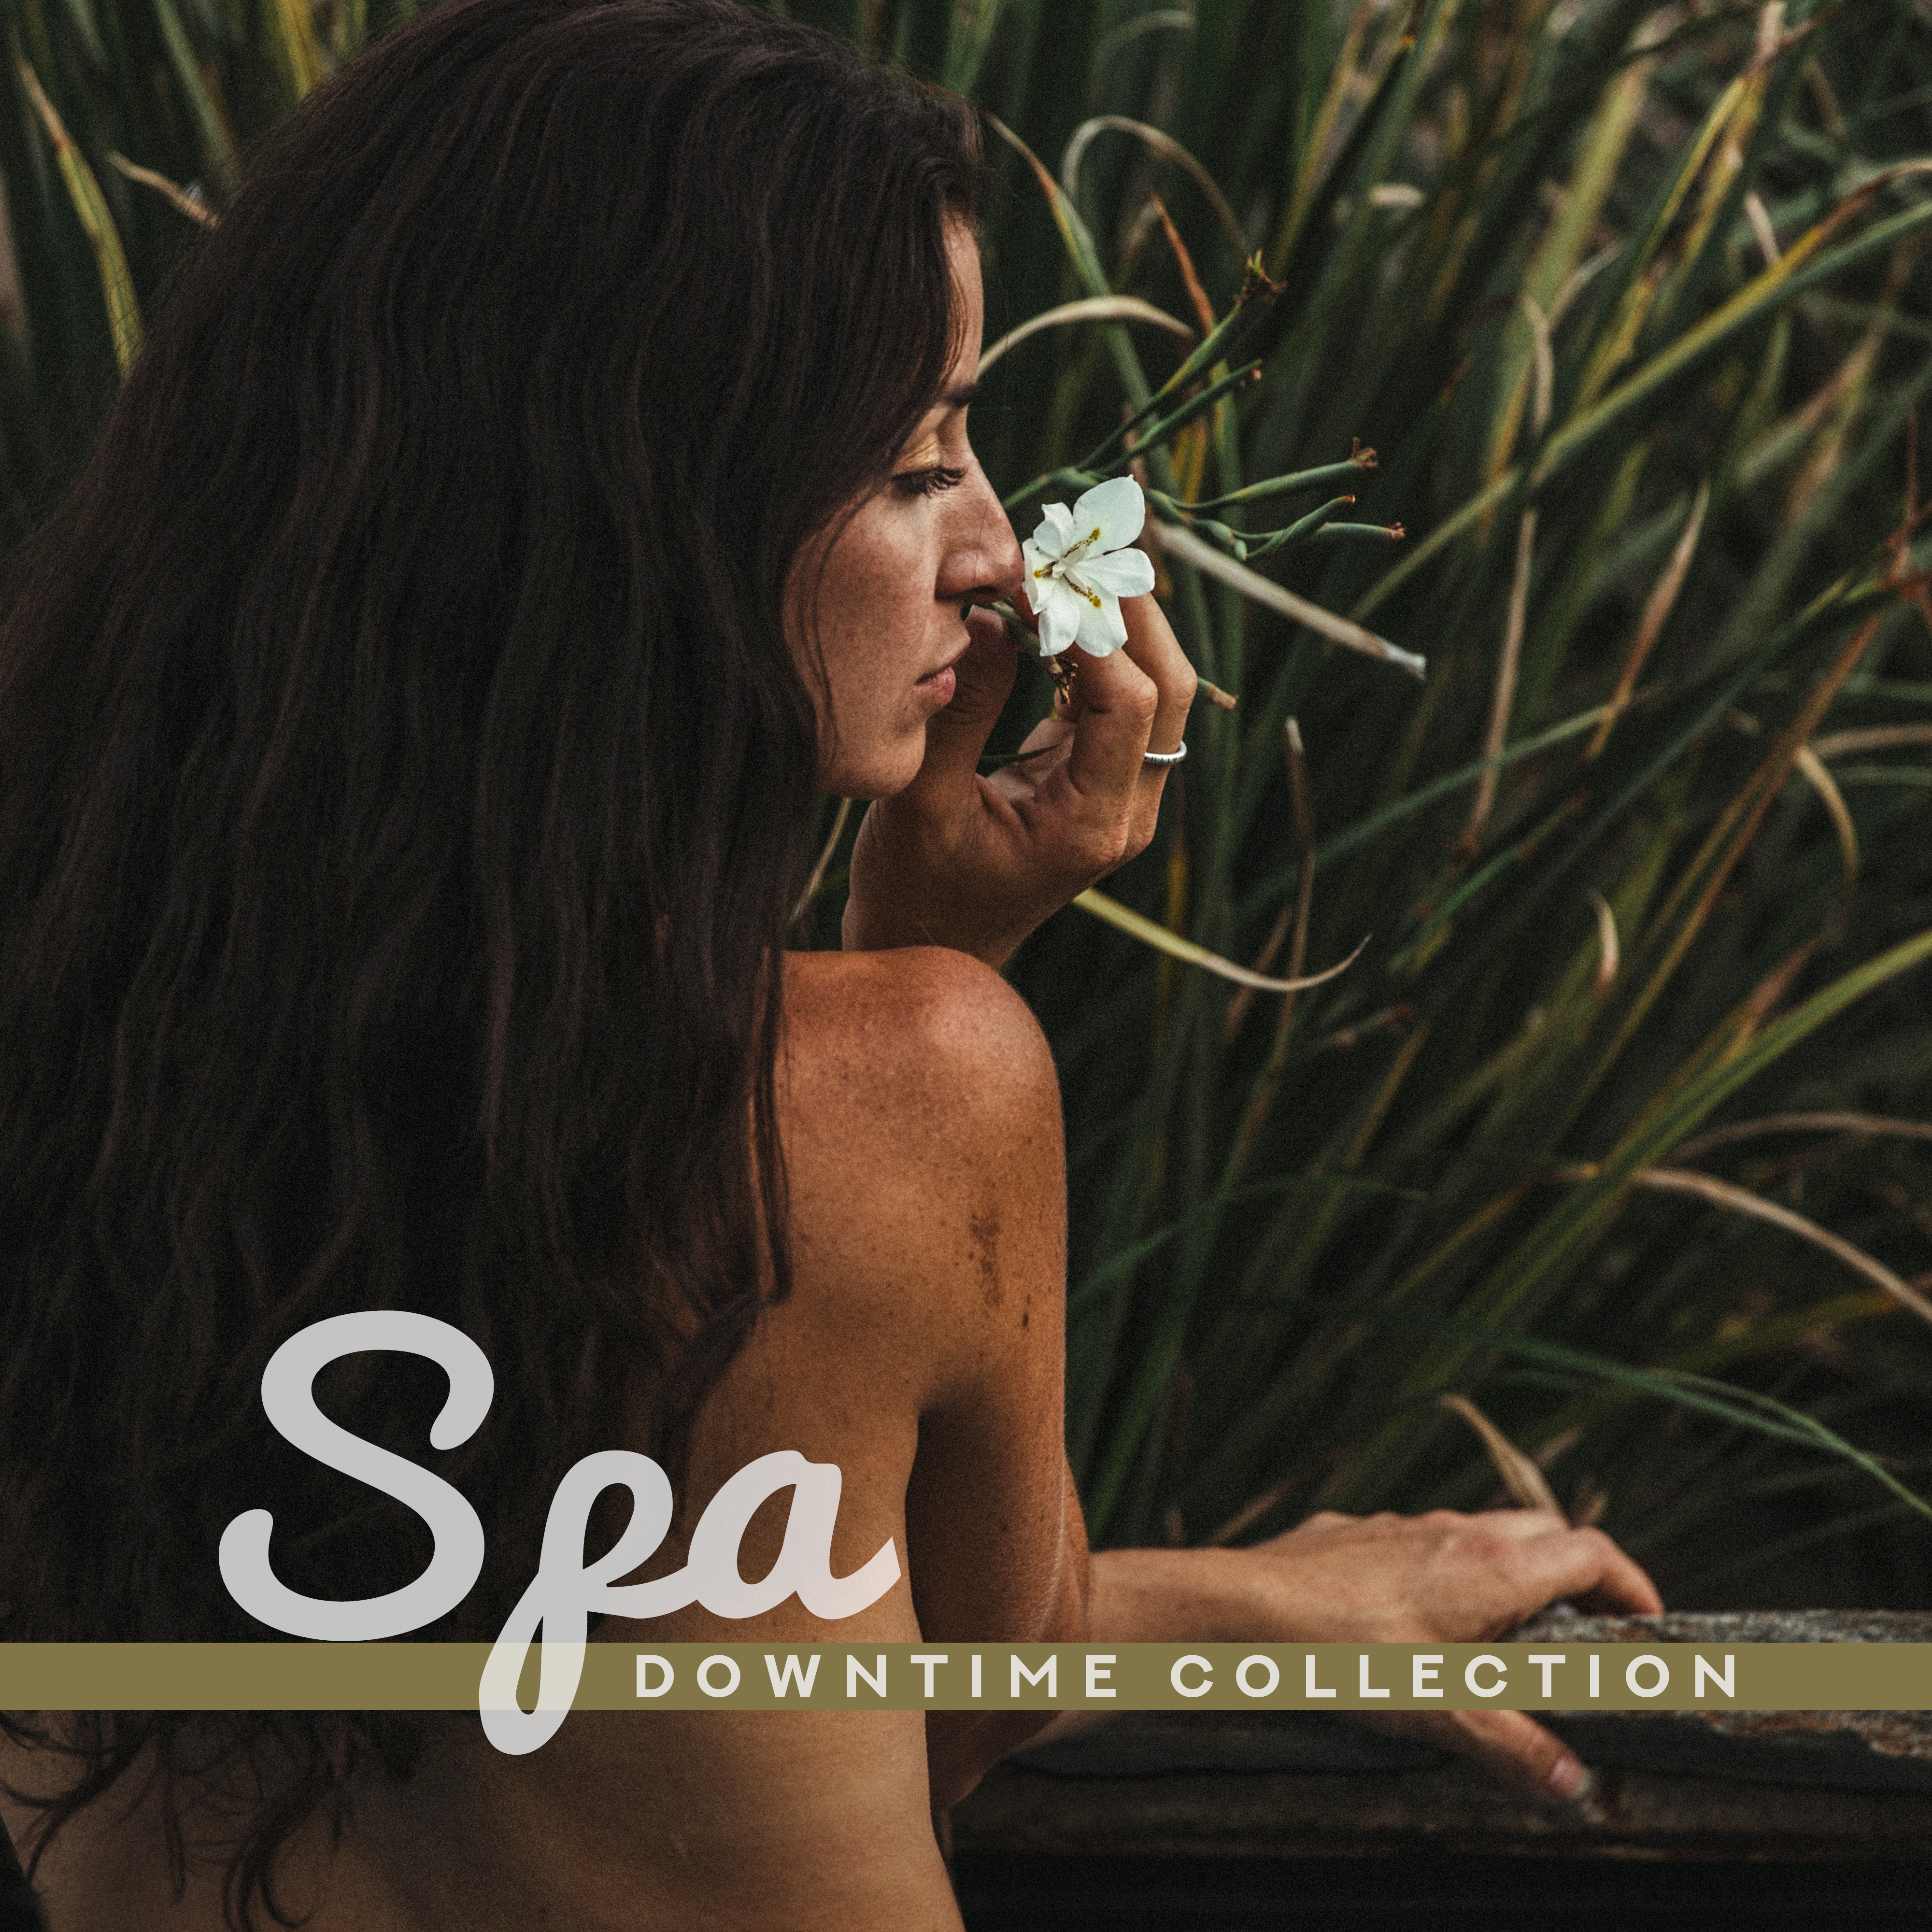 Spa Downtime Collection  Music for Spa, Wellness, Relaxation, Stress Relief, Massage Music, Healing Melodies to Calm Down, Deep Meditation